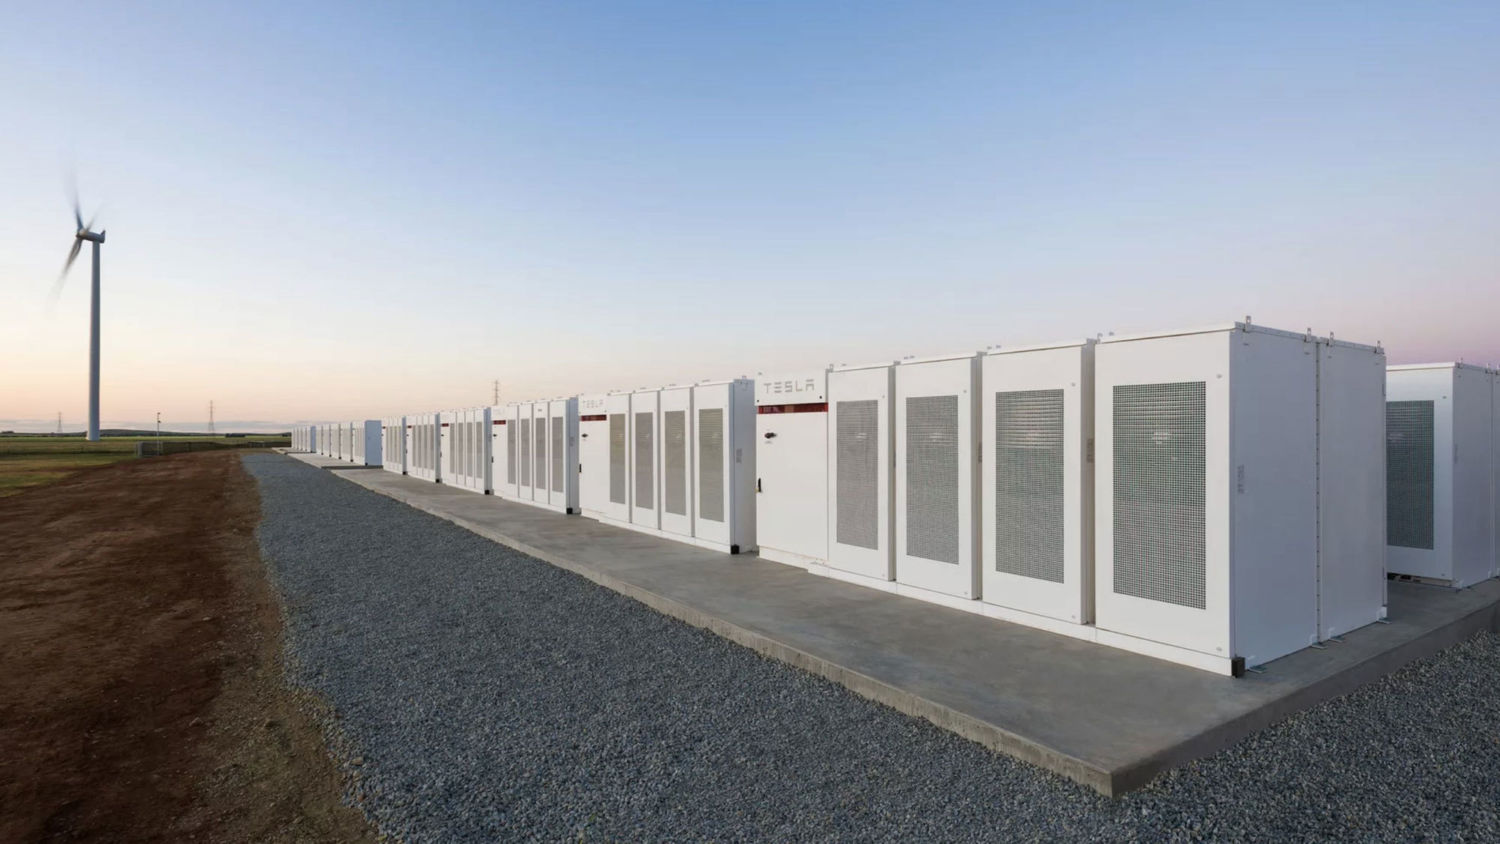 In Boost for Renewables, GridScale Battery Storage Is on the Rise